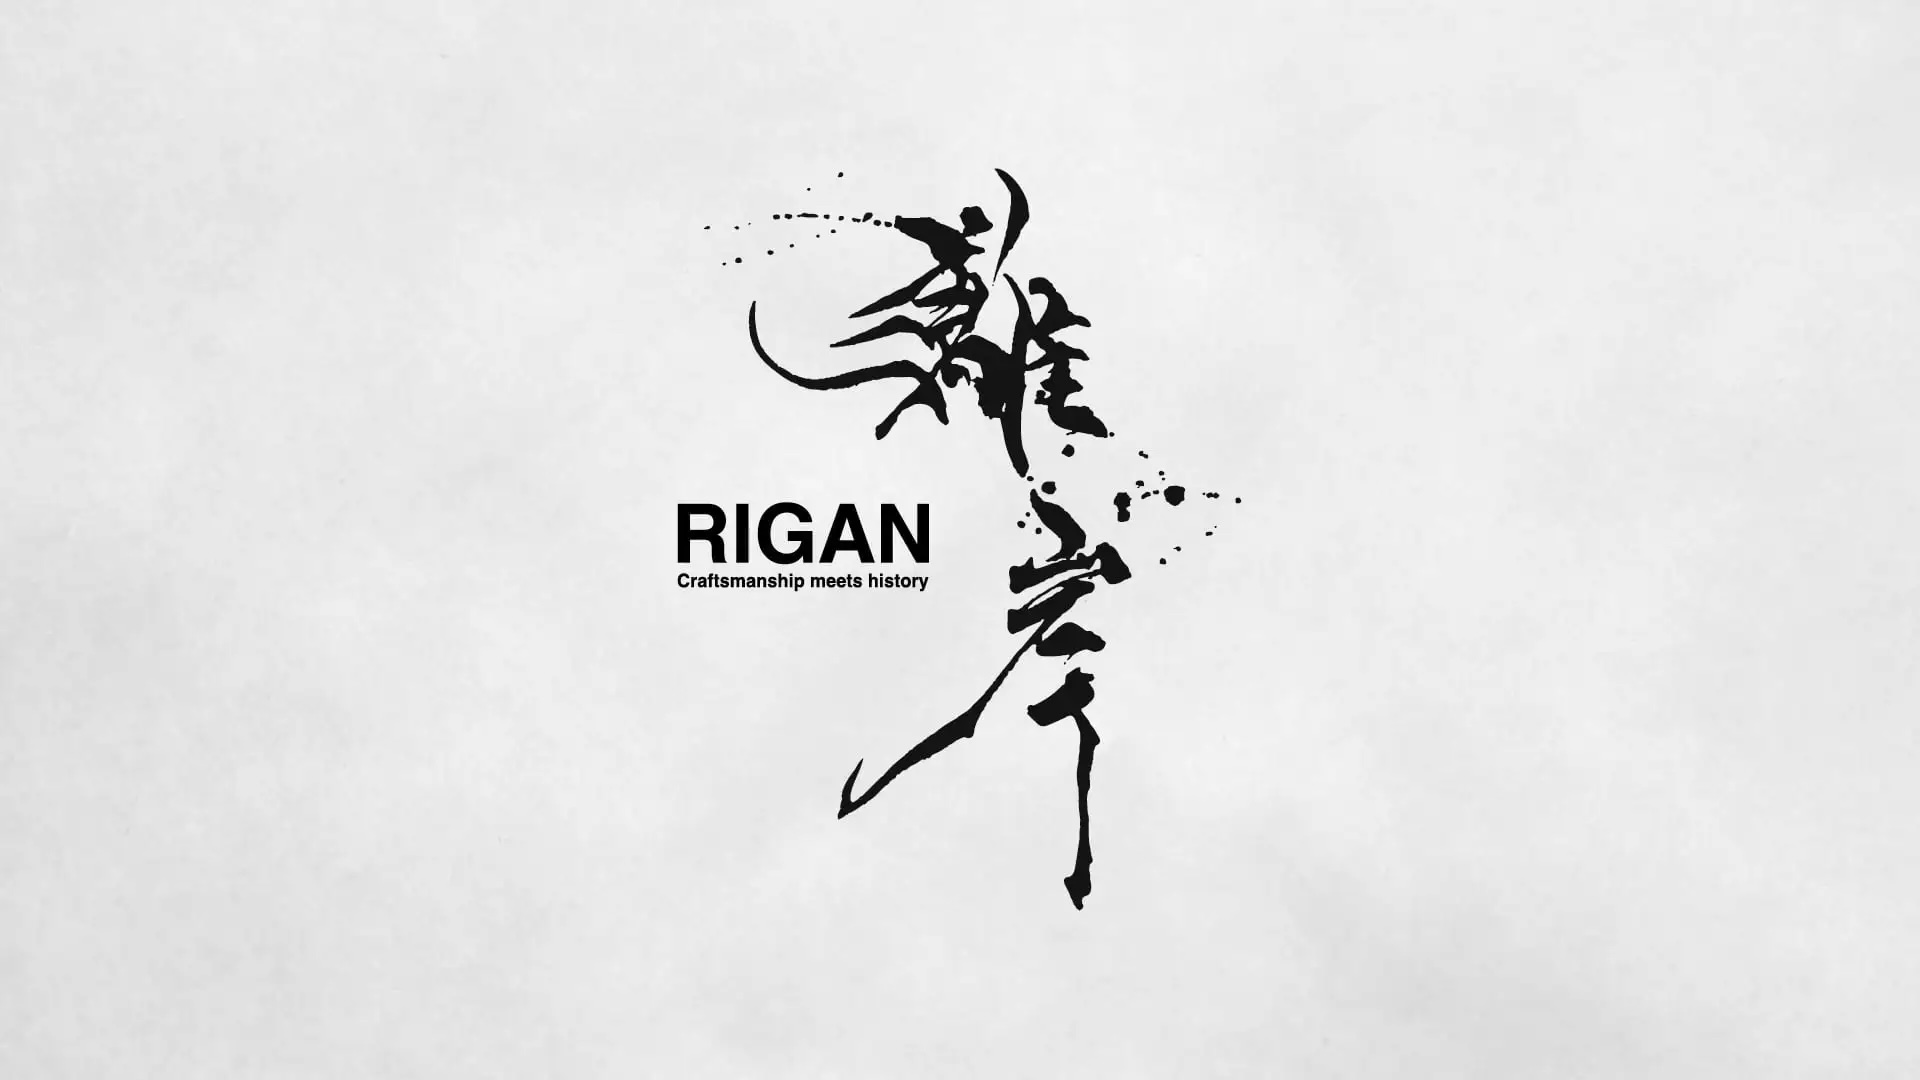 The Web Movie for Rigan, a platform connecting craftsmen in Nichinan City, Miyazaki Prefecture has been released!